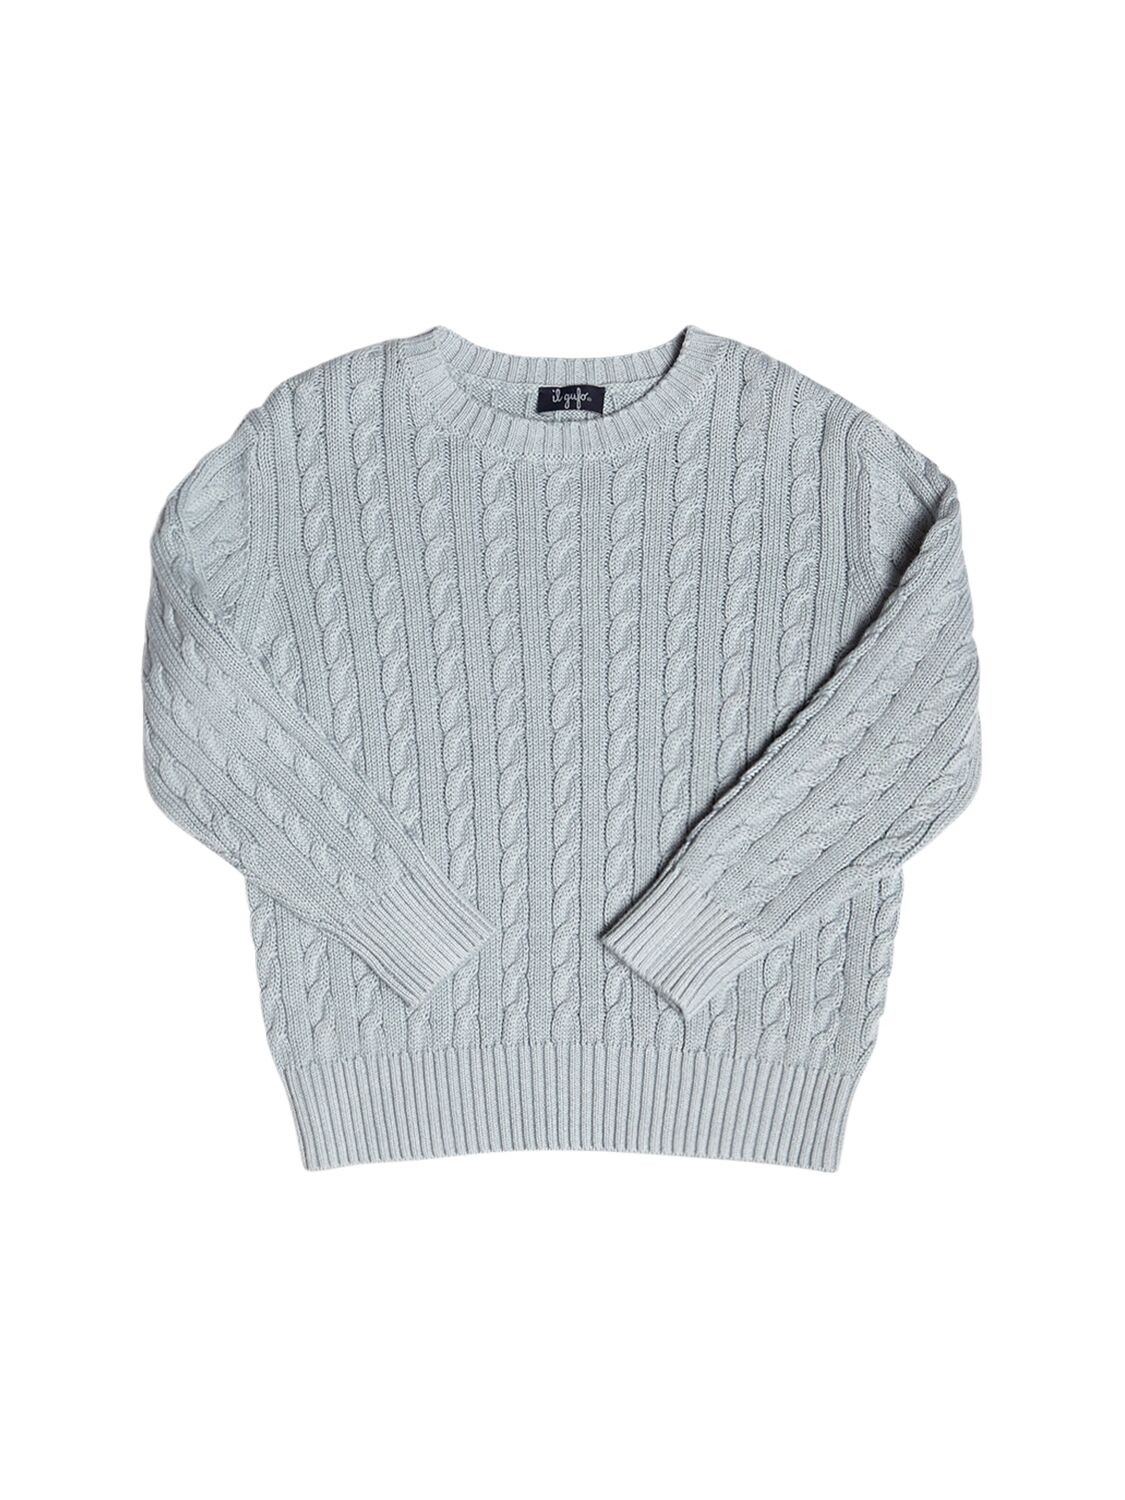 Image of Cable Knit Cotton Sweater